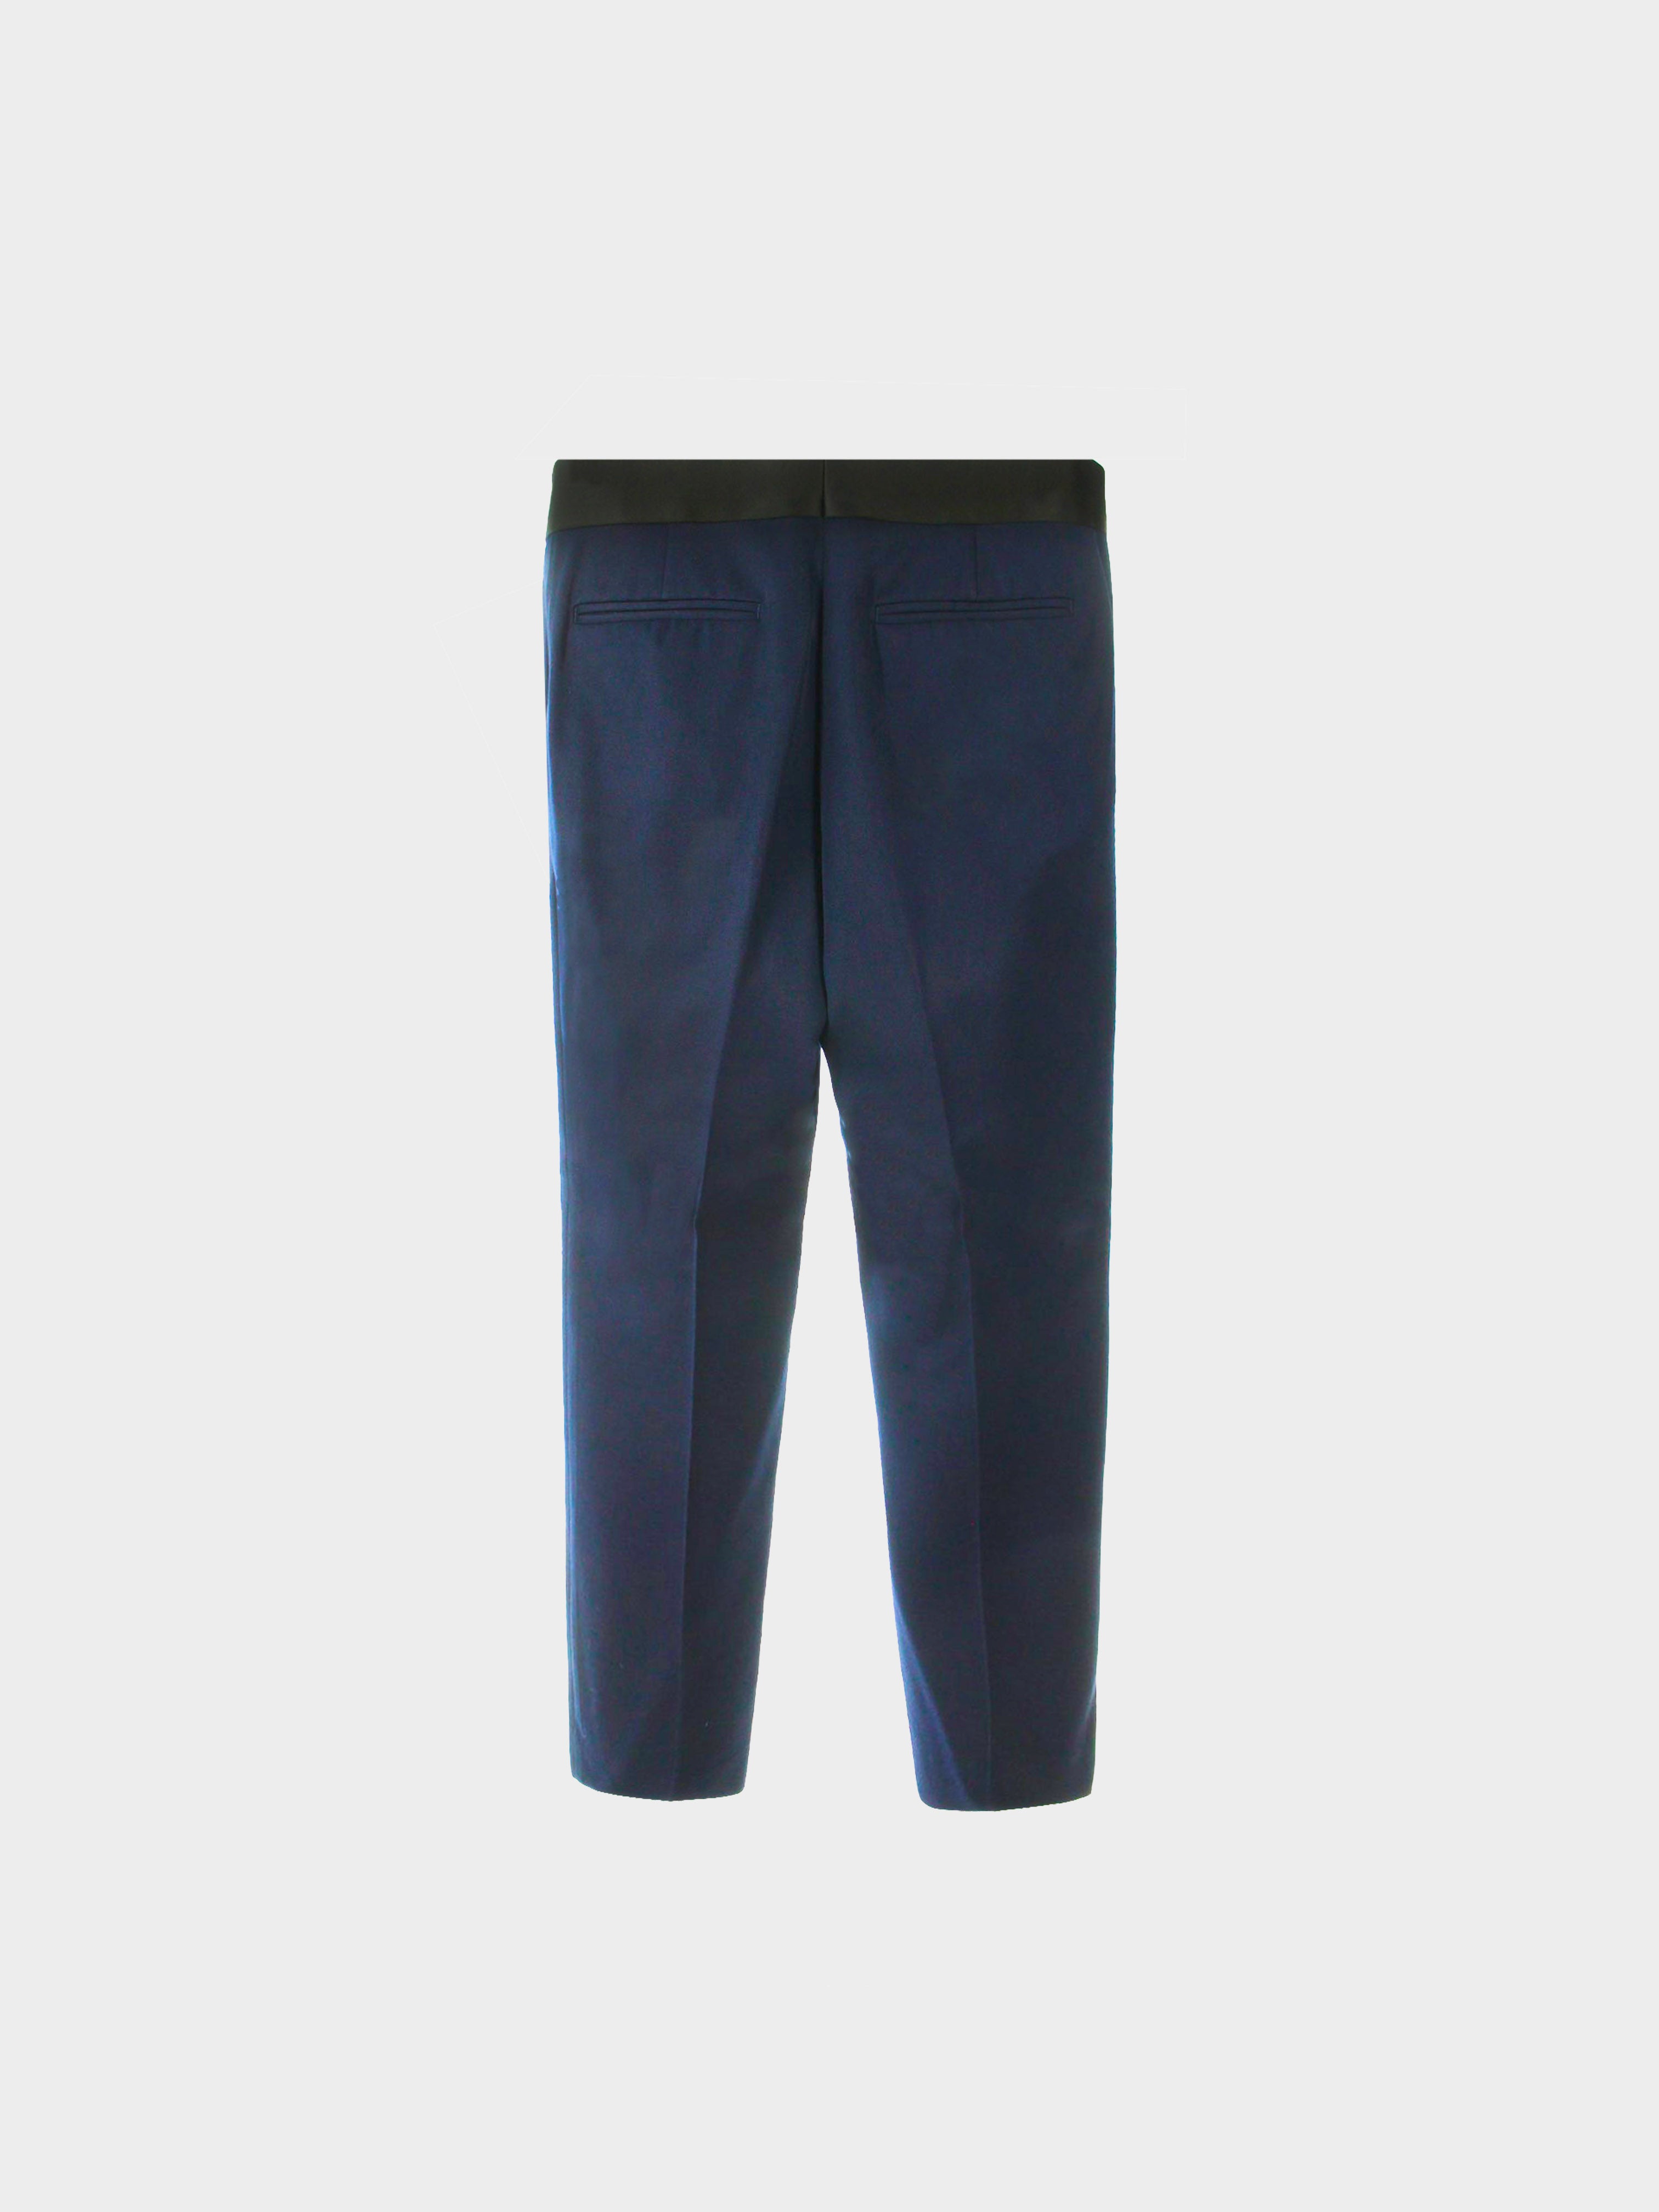 Céline by Phoebe Philo 2000s Navy Blue Stovepipe Trousers · INTO